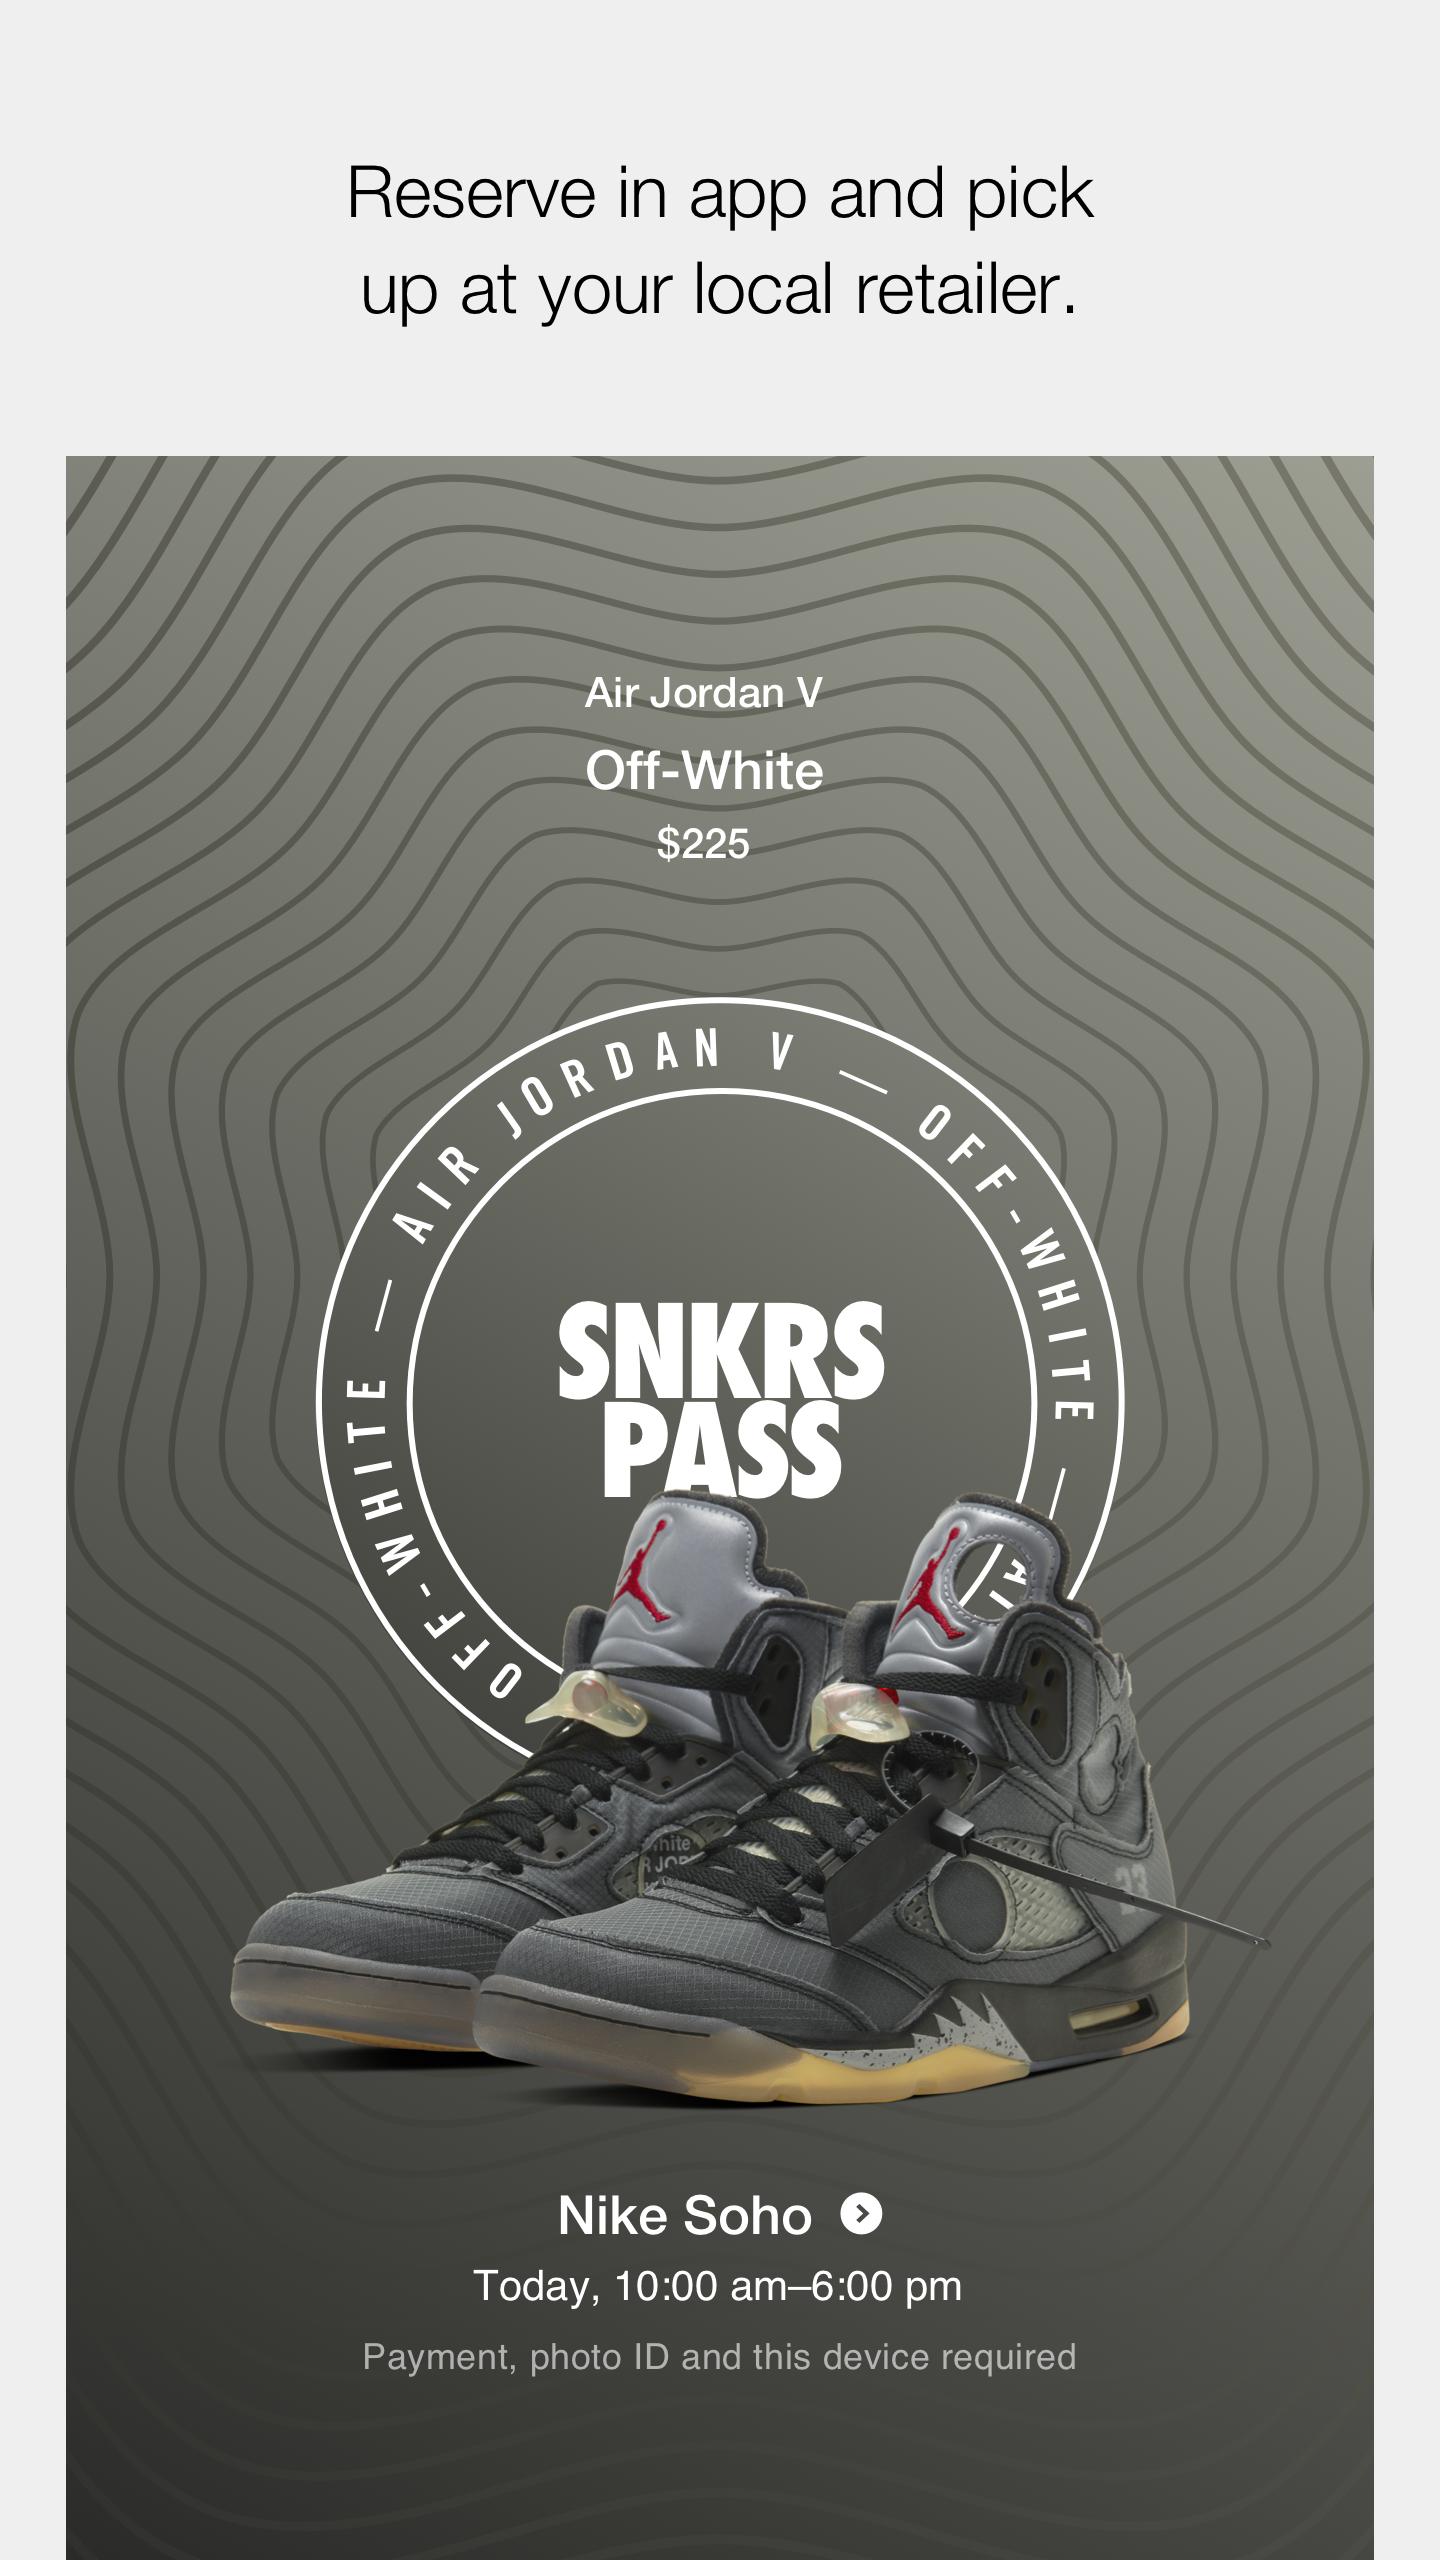 Nike SNKRS: Find & Buy The Latest Sneaker Releases 3.1.1 Screenshot 5